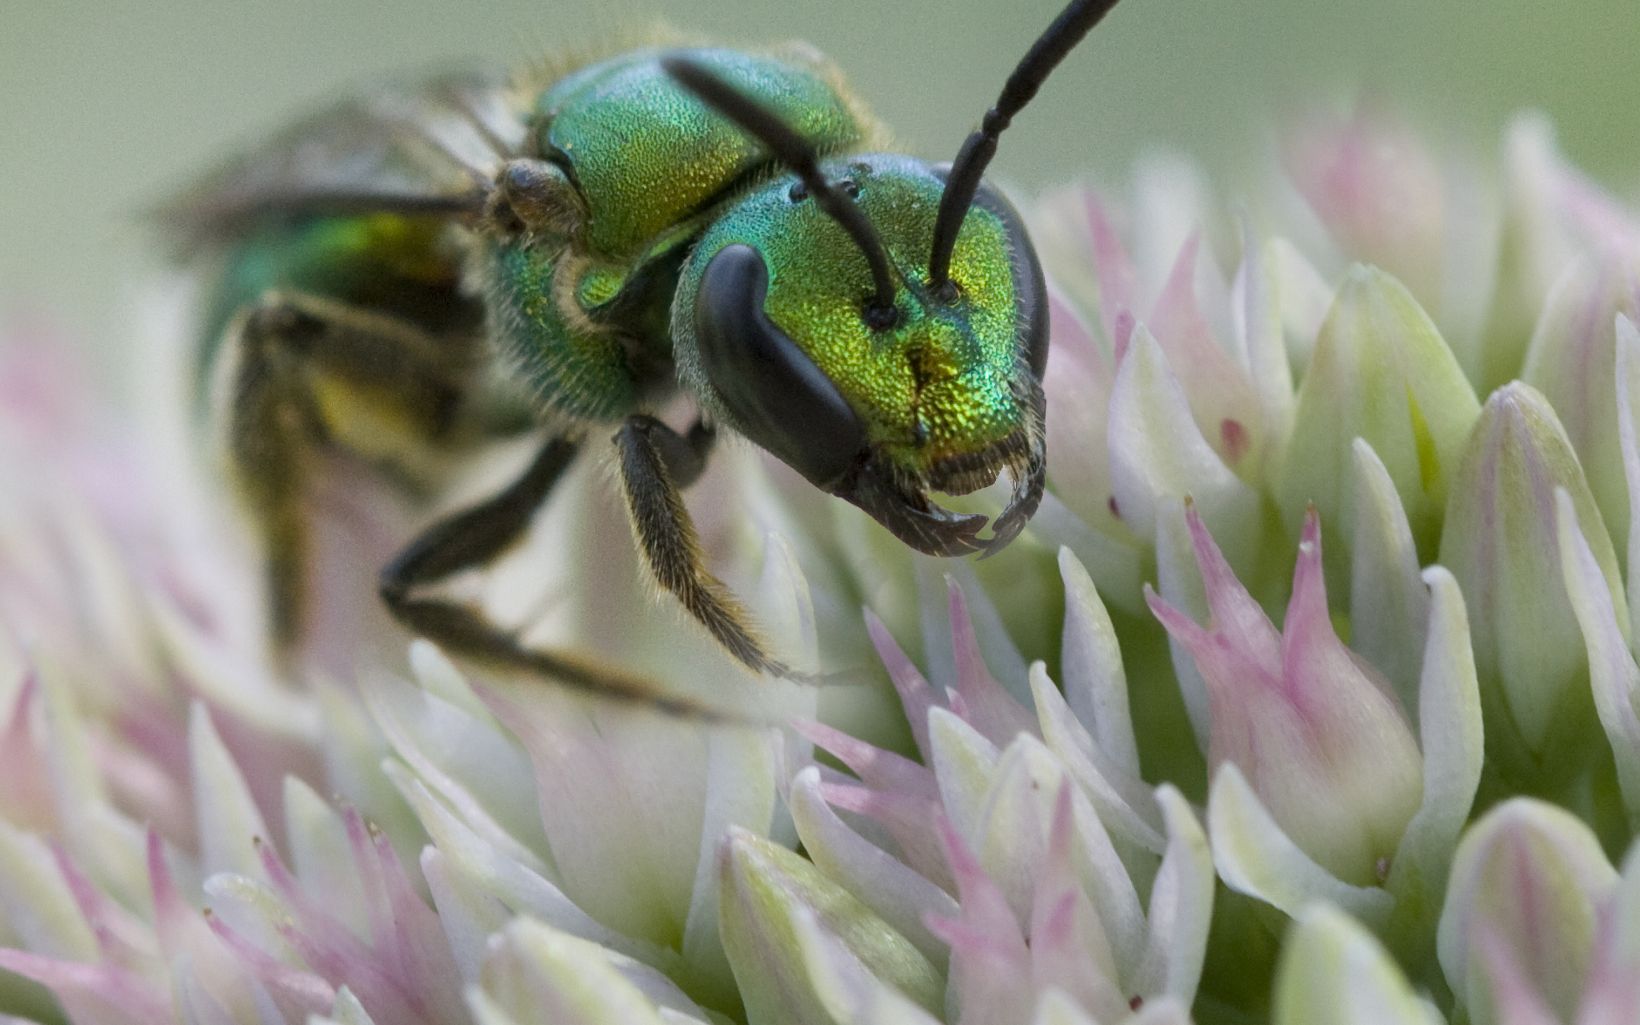 Green halictid bee 70 percent of our native bees nest in the ground. This metallic green halictid bee, also known as a sweat bee, digs a little burrow in the ground for its young. © Barbara Eckstein/Foter